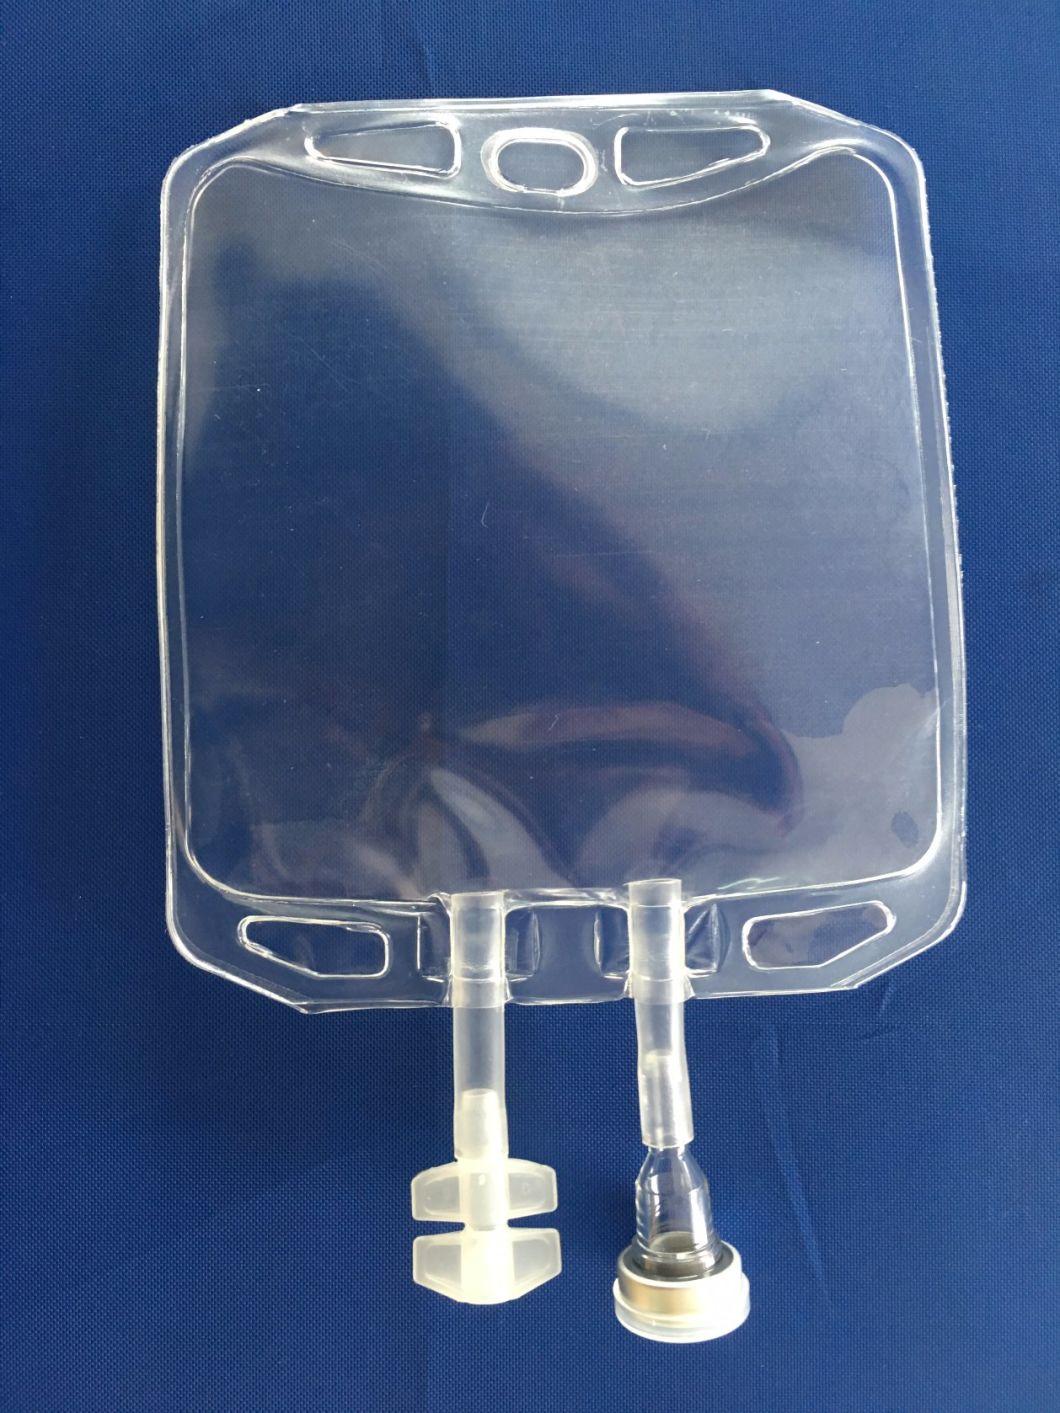 Plastic Medical Injection Bag Disposable Infusion Drip Bags